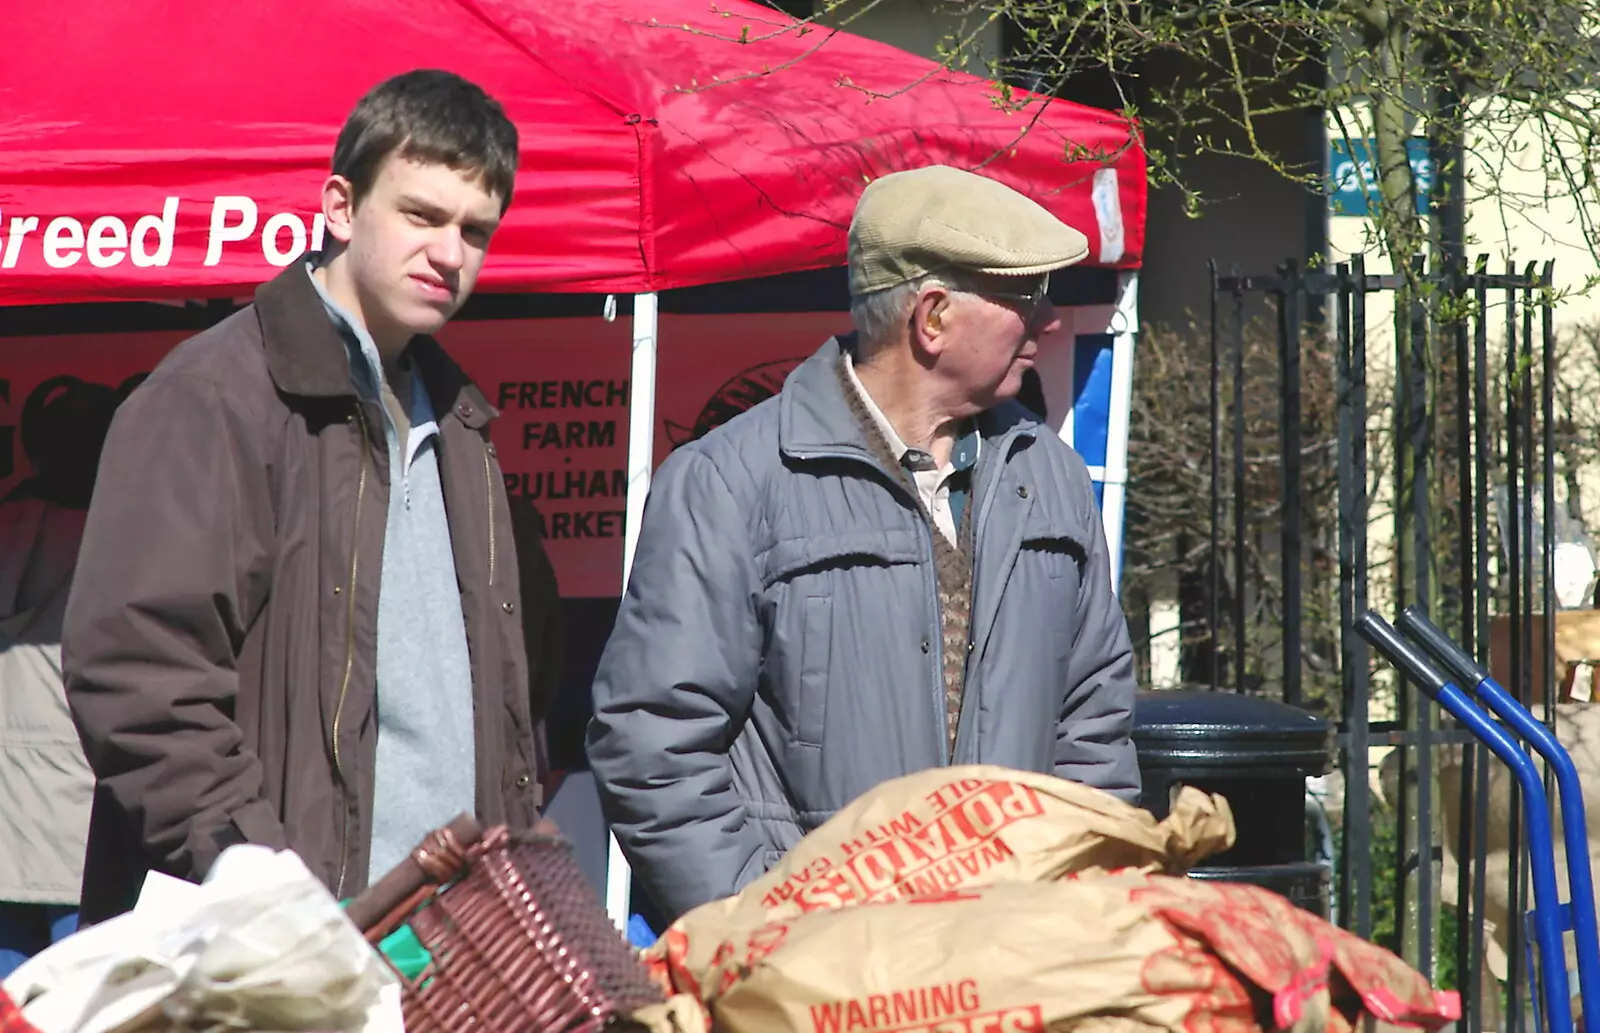 The Potato People on the market, from Norwich Market, the BSCC at Occold, and Diss Publishing - 10th April 2005